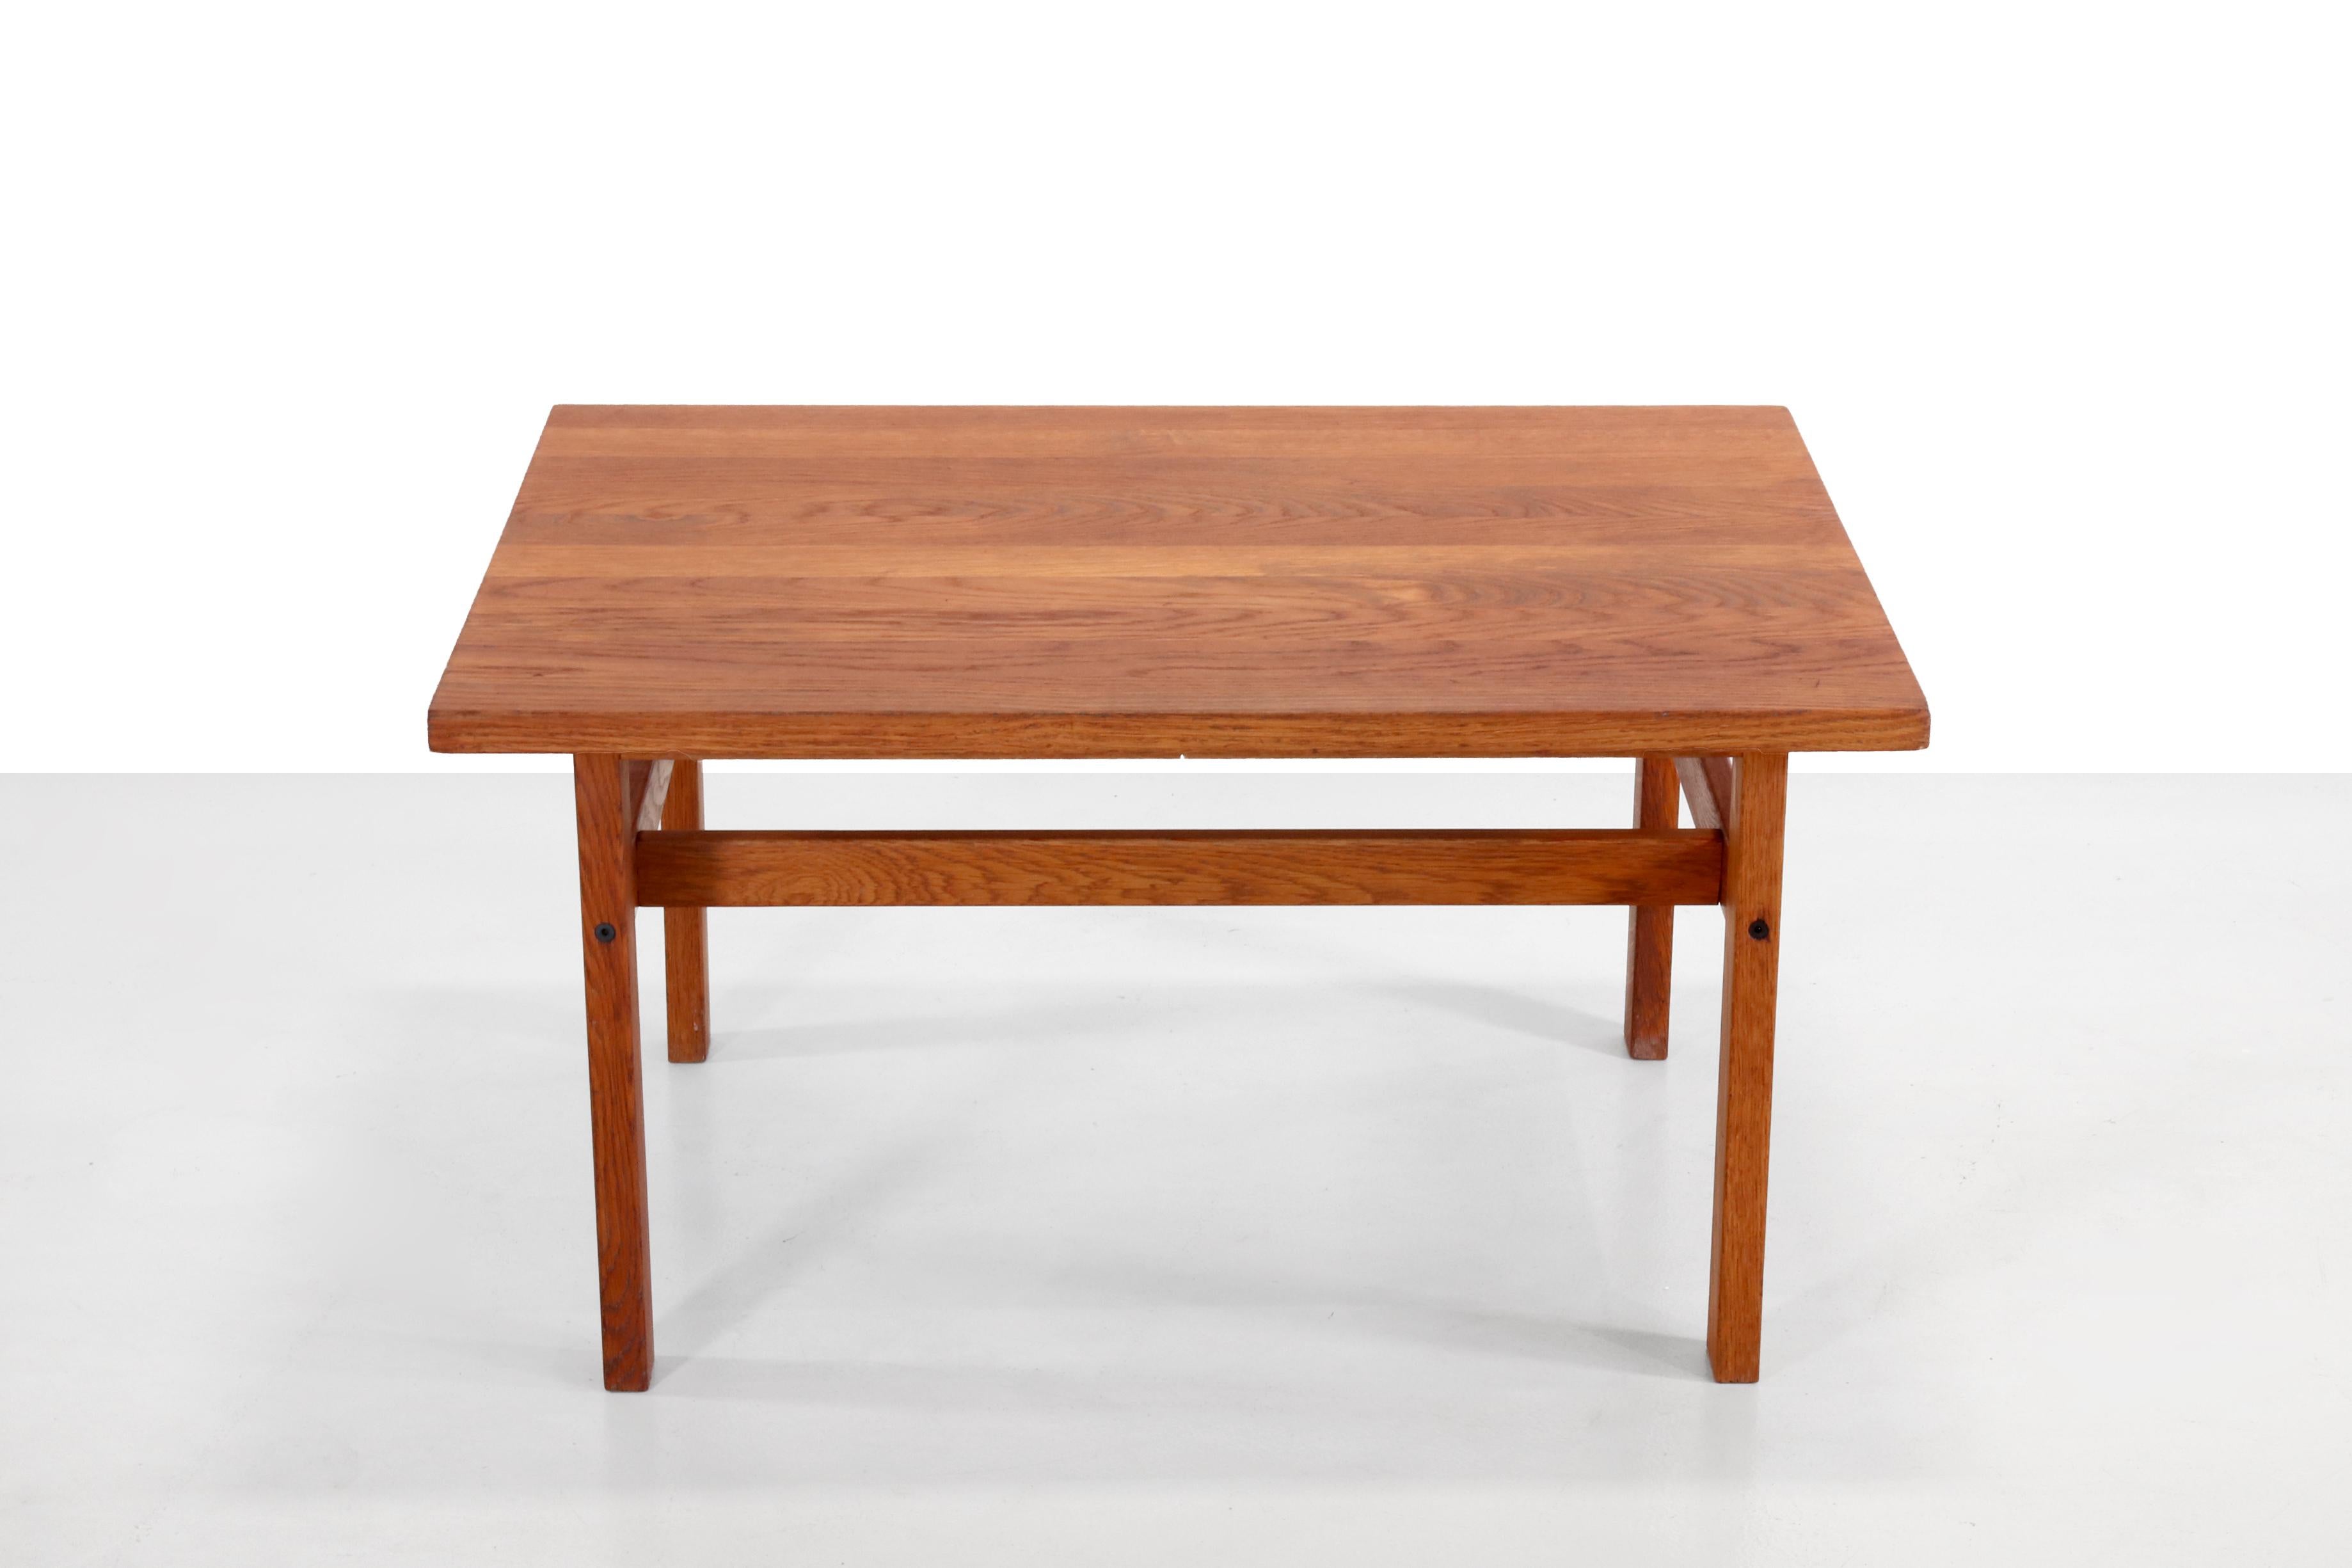 Beautiful solid Oak wooden FDB table with Danish furnituremakers mark and with the model number 240. 
This shaker style coffee table or side table is 85 cm wide, 64.5 cm deep and 45 cm high.